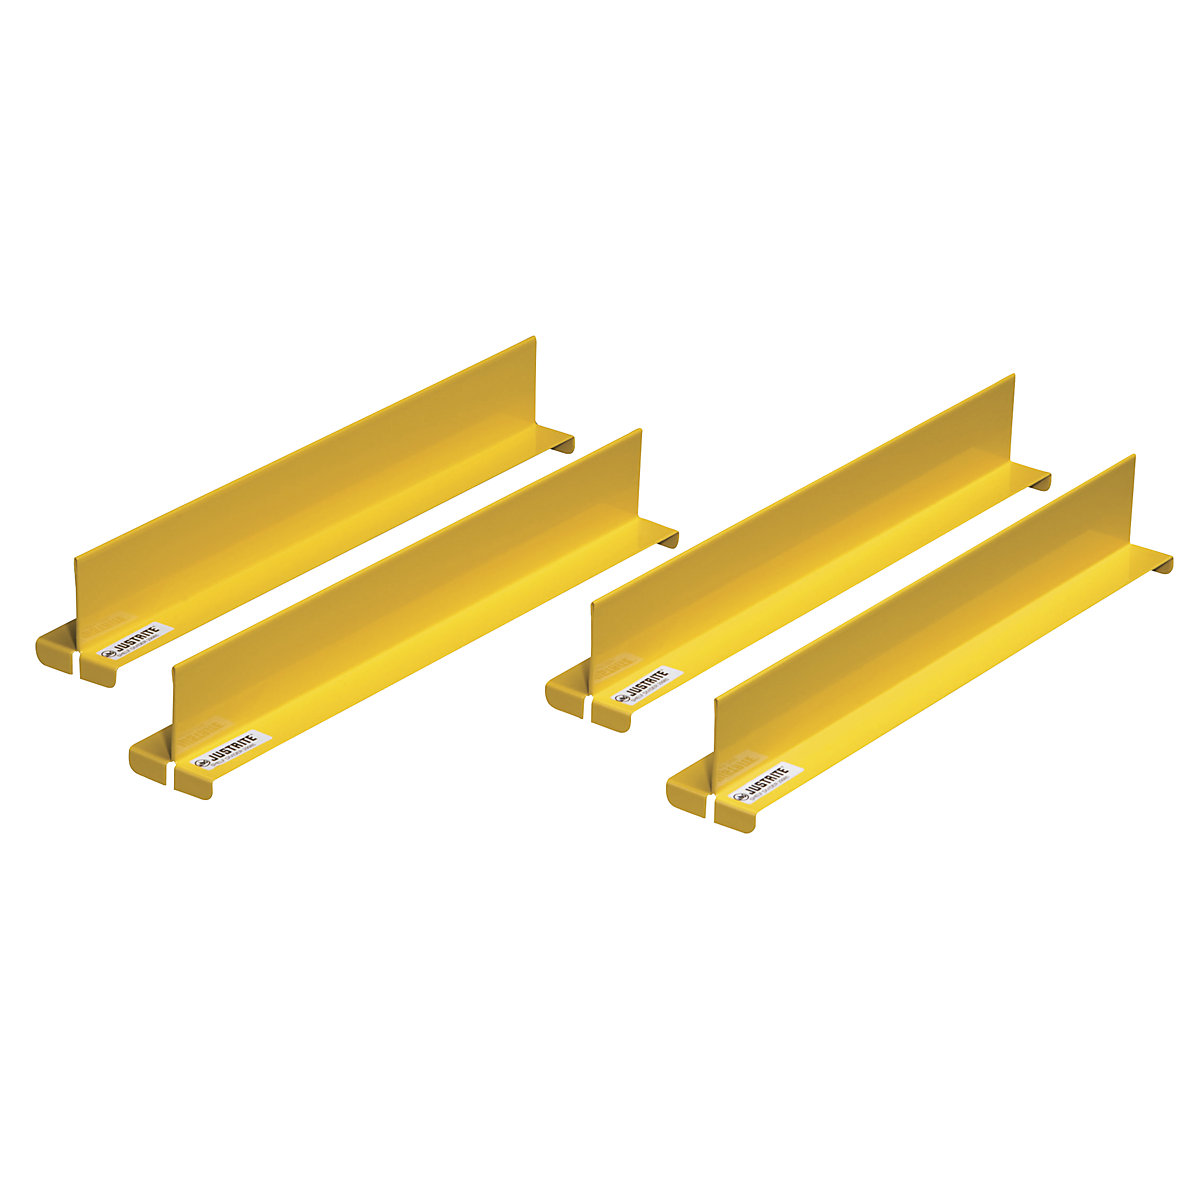 Shelf dividers – Justrite, yellow, pack of 4, for depth 457 mm